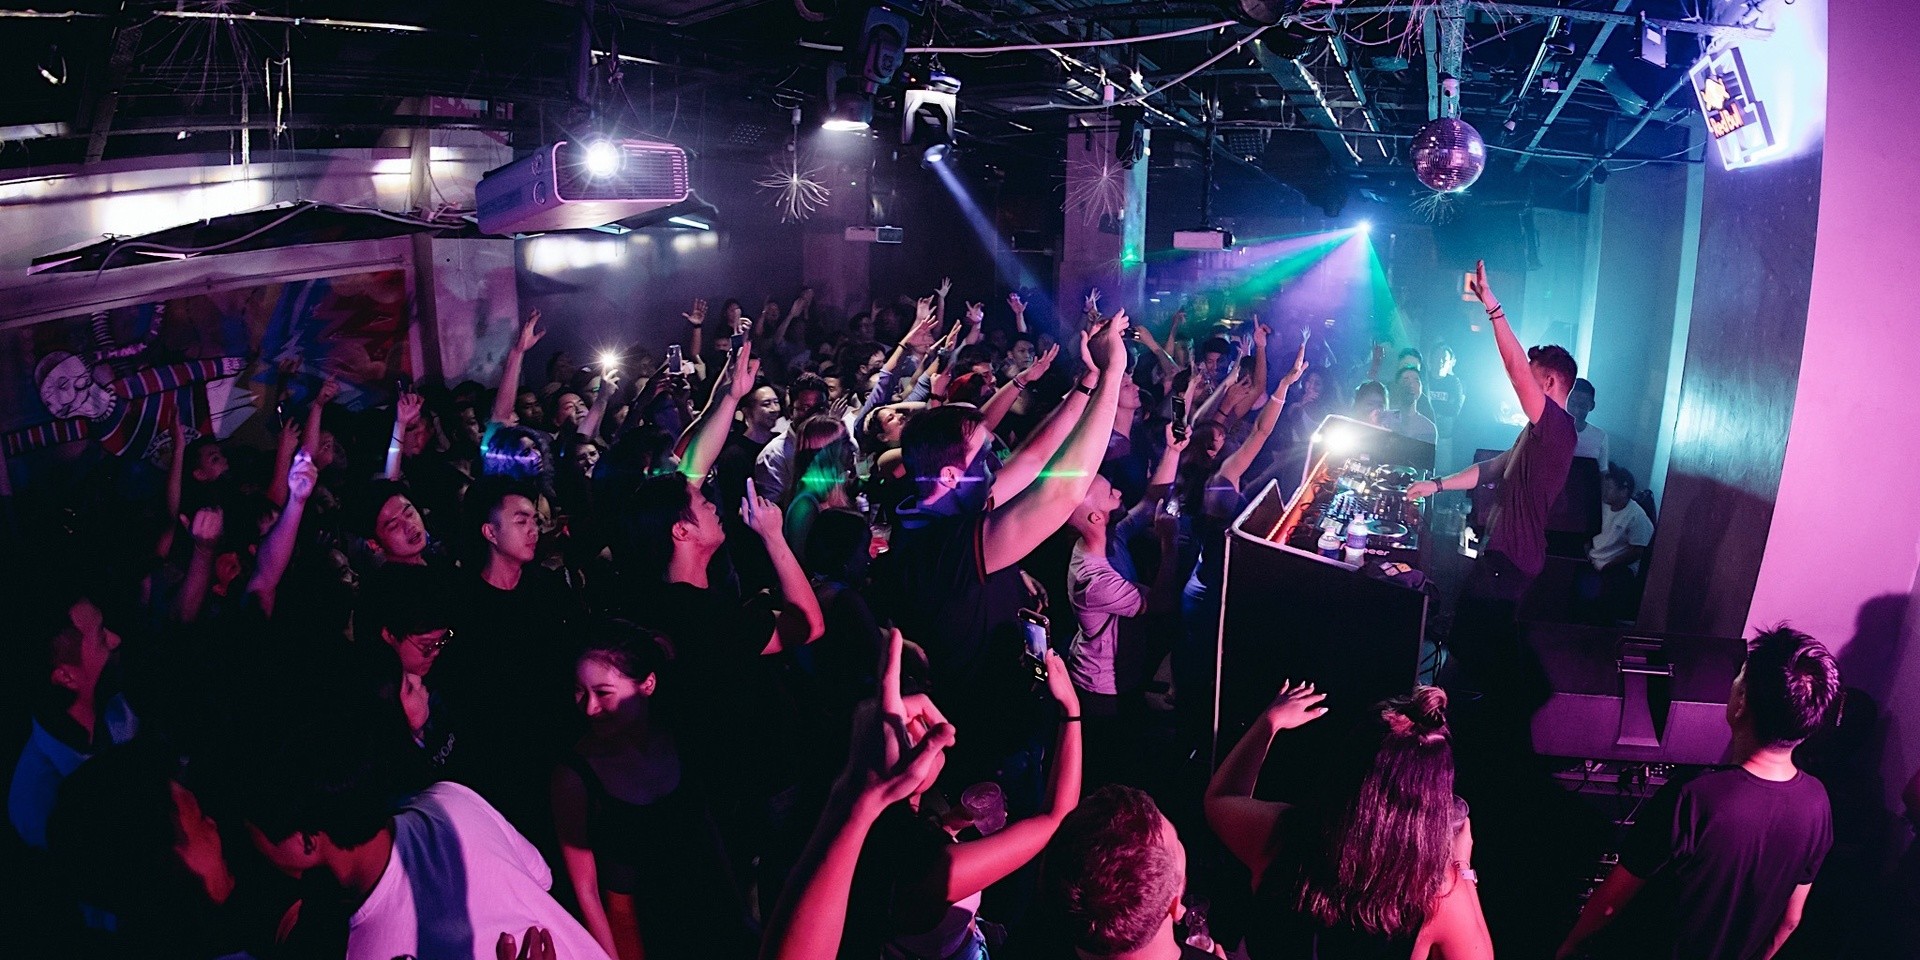 Singapore nightclub Canvas closes its doors after 7 years 